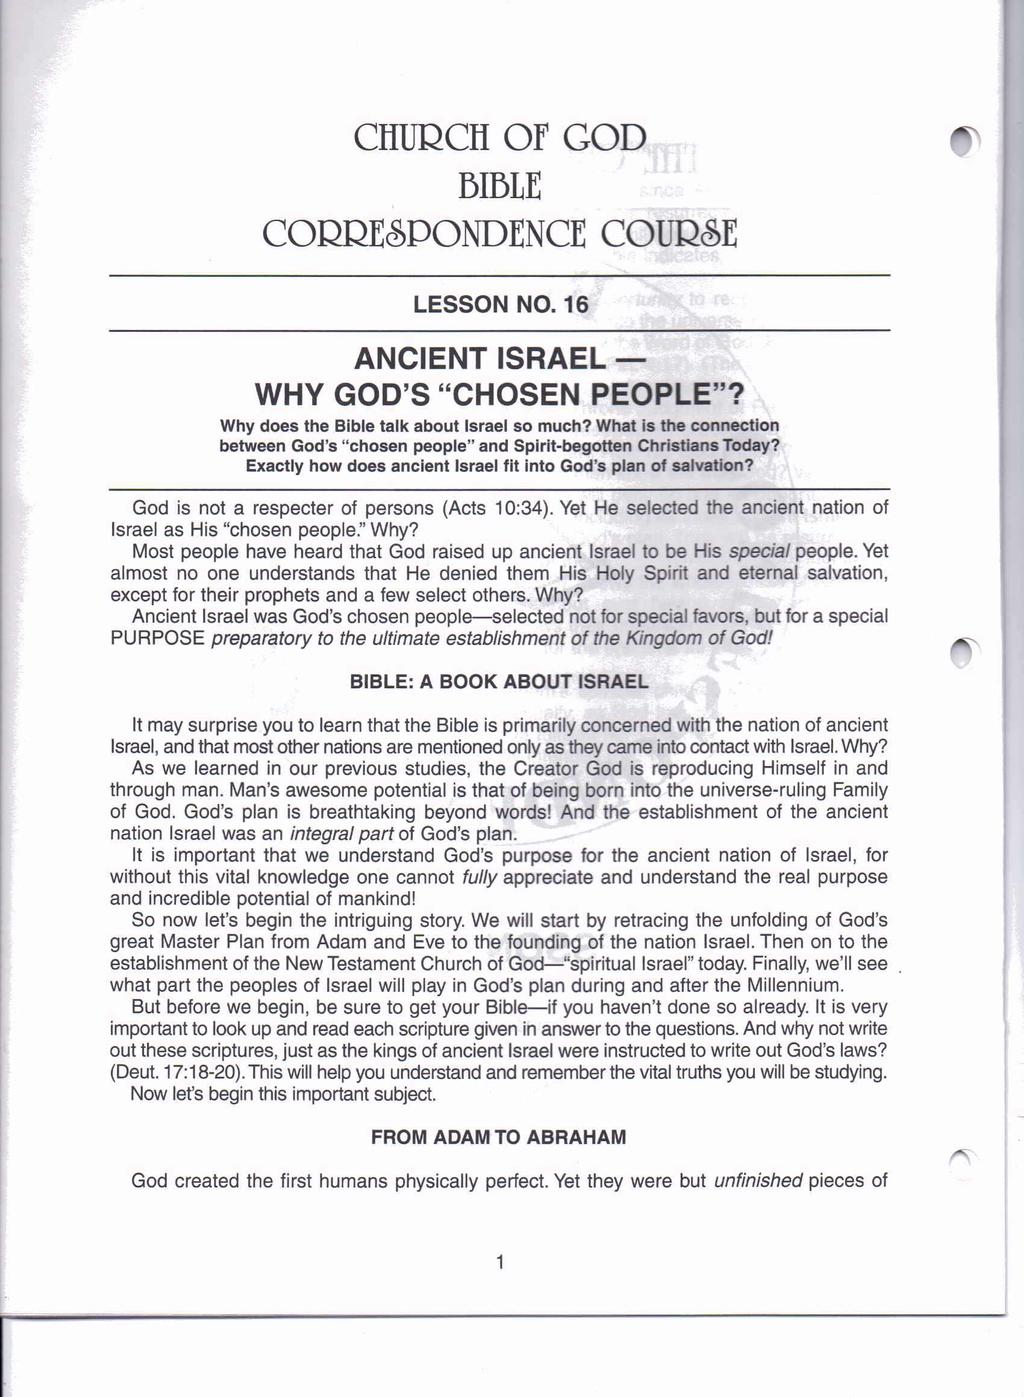 CHURCH OF GOD BIBLE CORRESPONDENCE COURSE LESSON NO. 16 ANCIENT ISRAEL - WHY GOD'S "CHOSEN PEOPLE"? Why does the Bible talk about Israel so much?